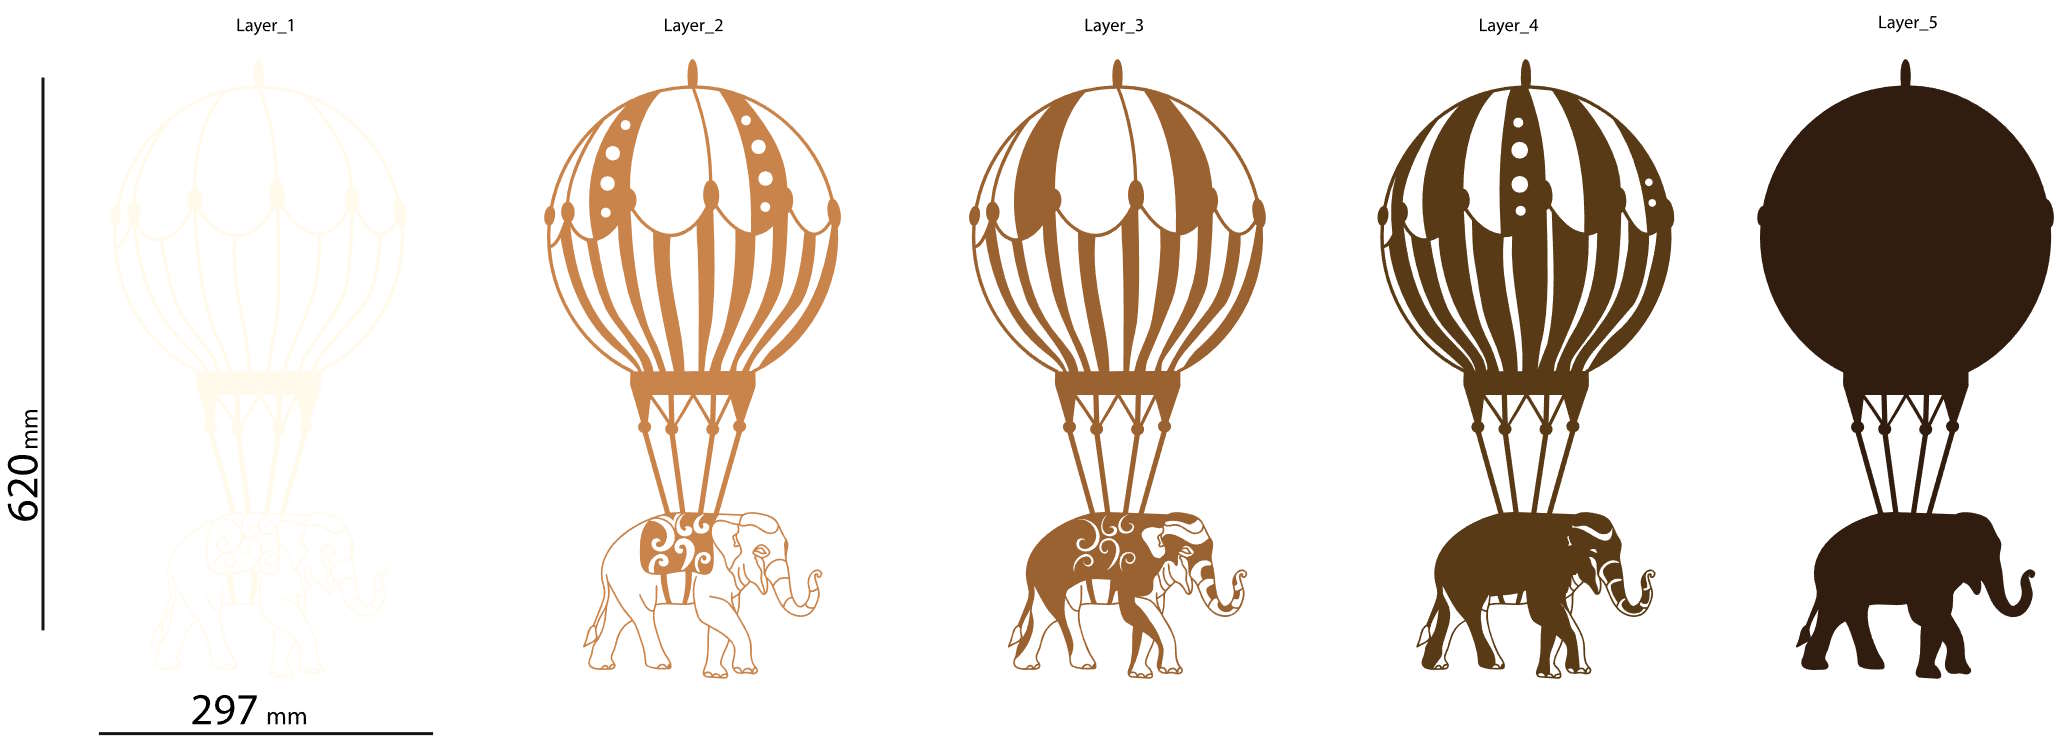 Hot Air Balloon with Elephant multilayer 3D Cut layers